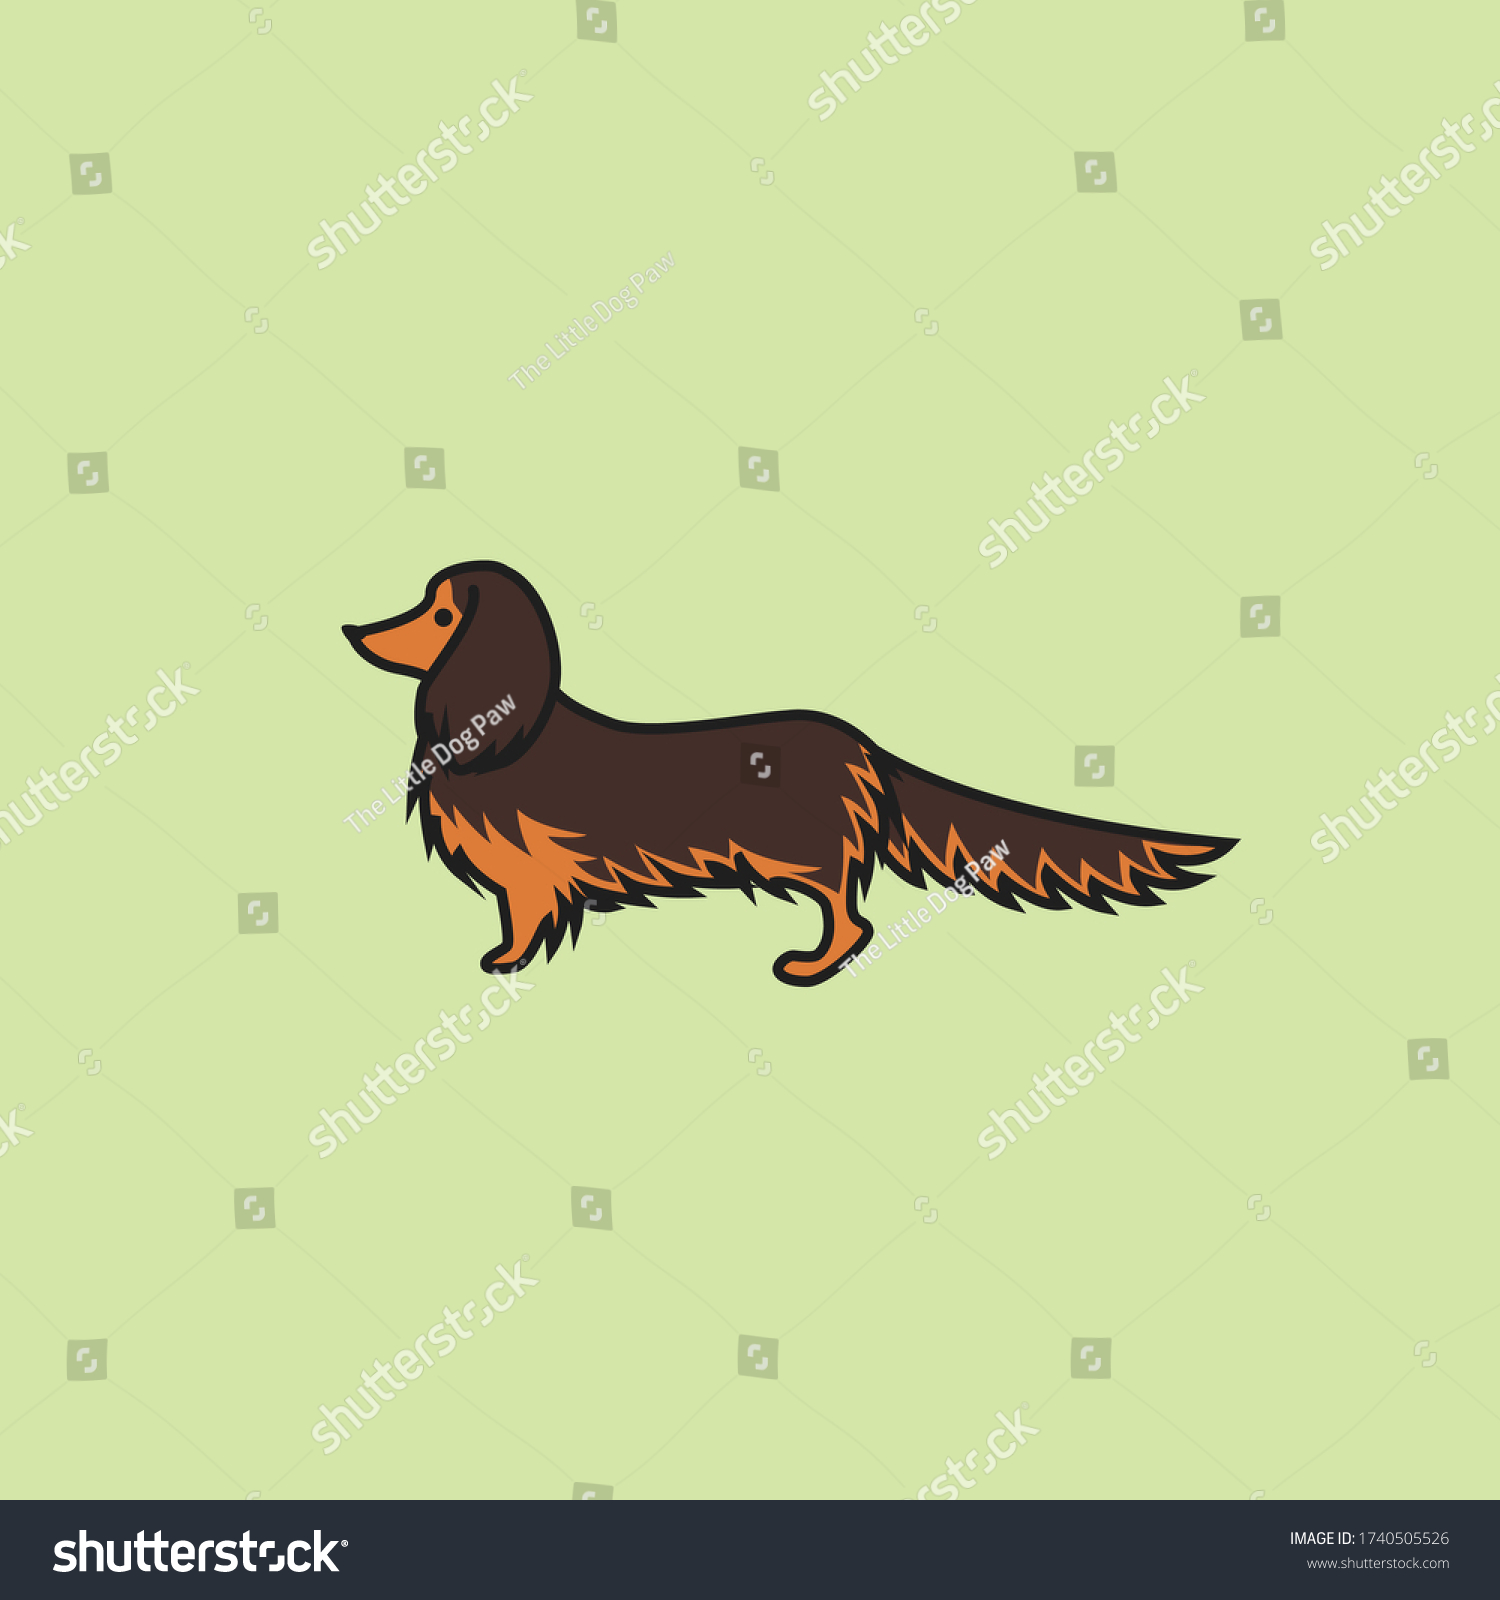 SVG of Side View Long Haired Dachshund from Side Drawing Vector Illustration for Dog Related Business svg